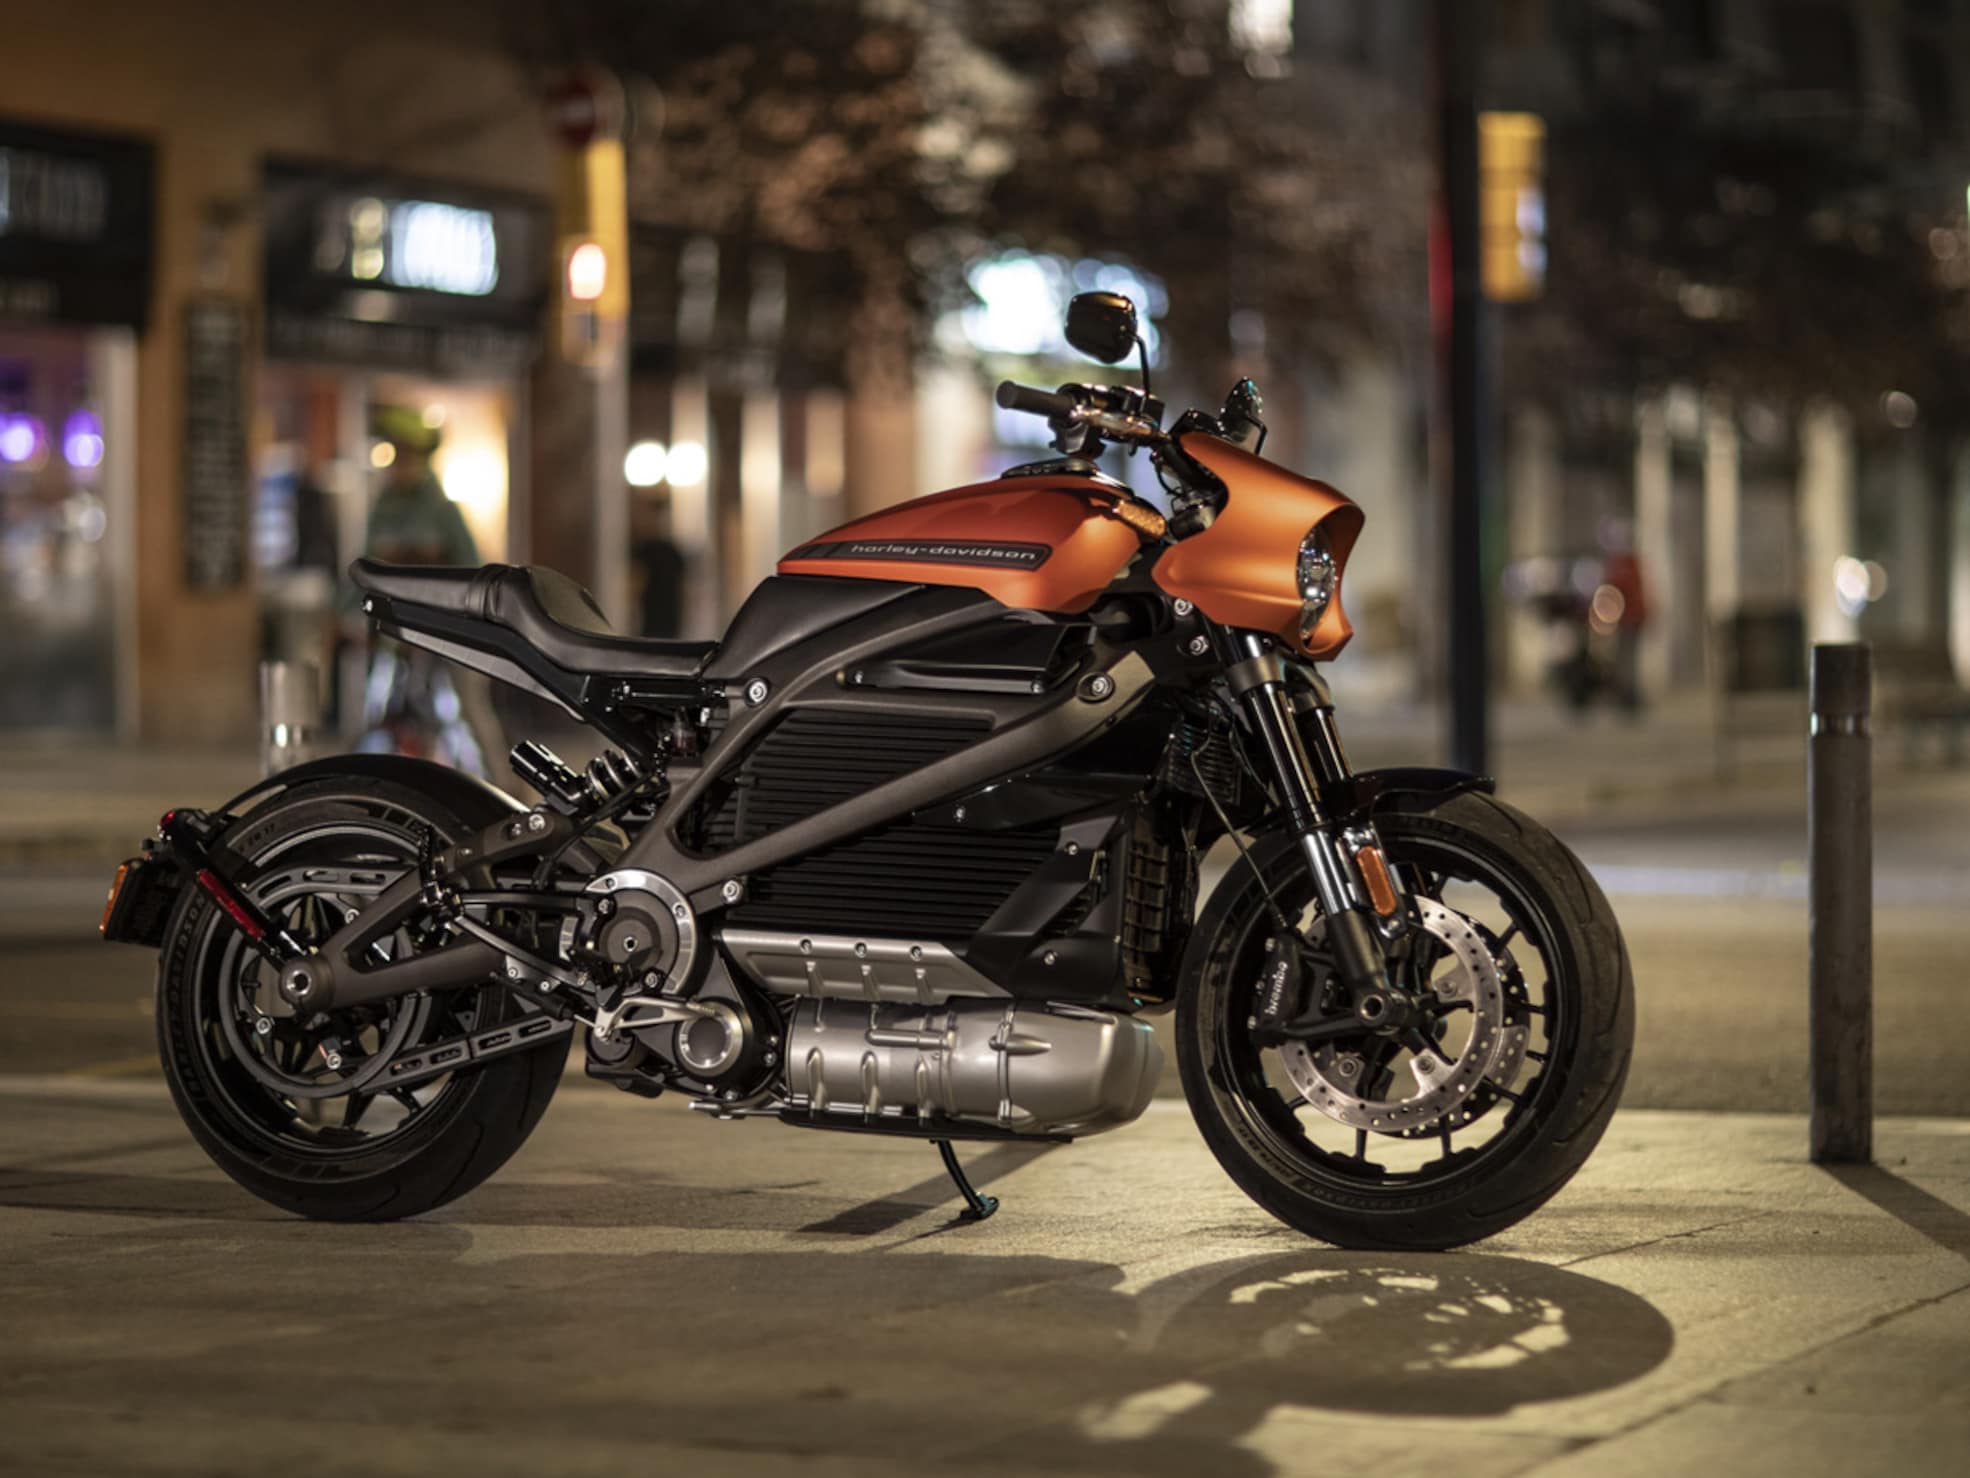 Harley-Davidson LiveWire Electric motorcycle at night on street